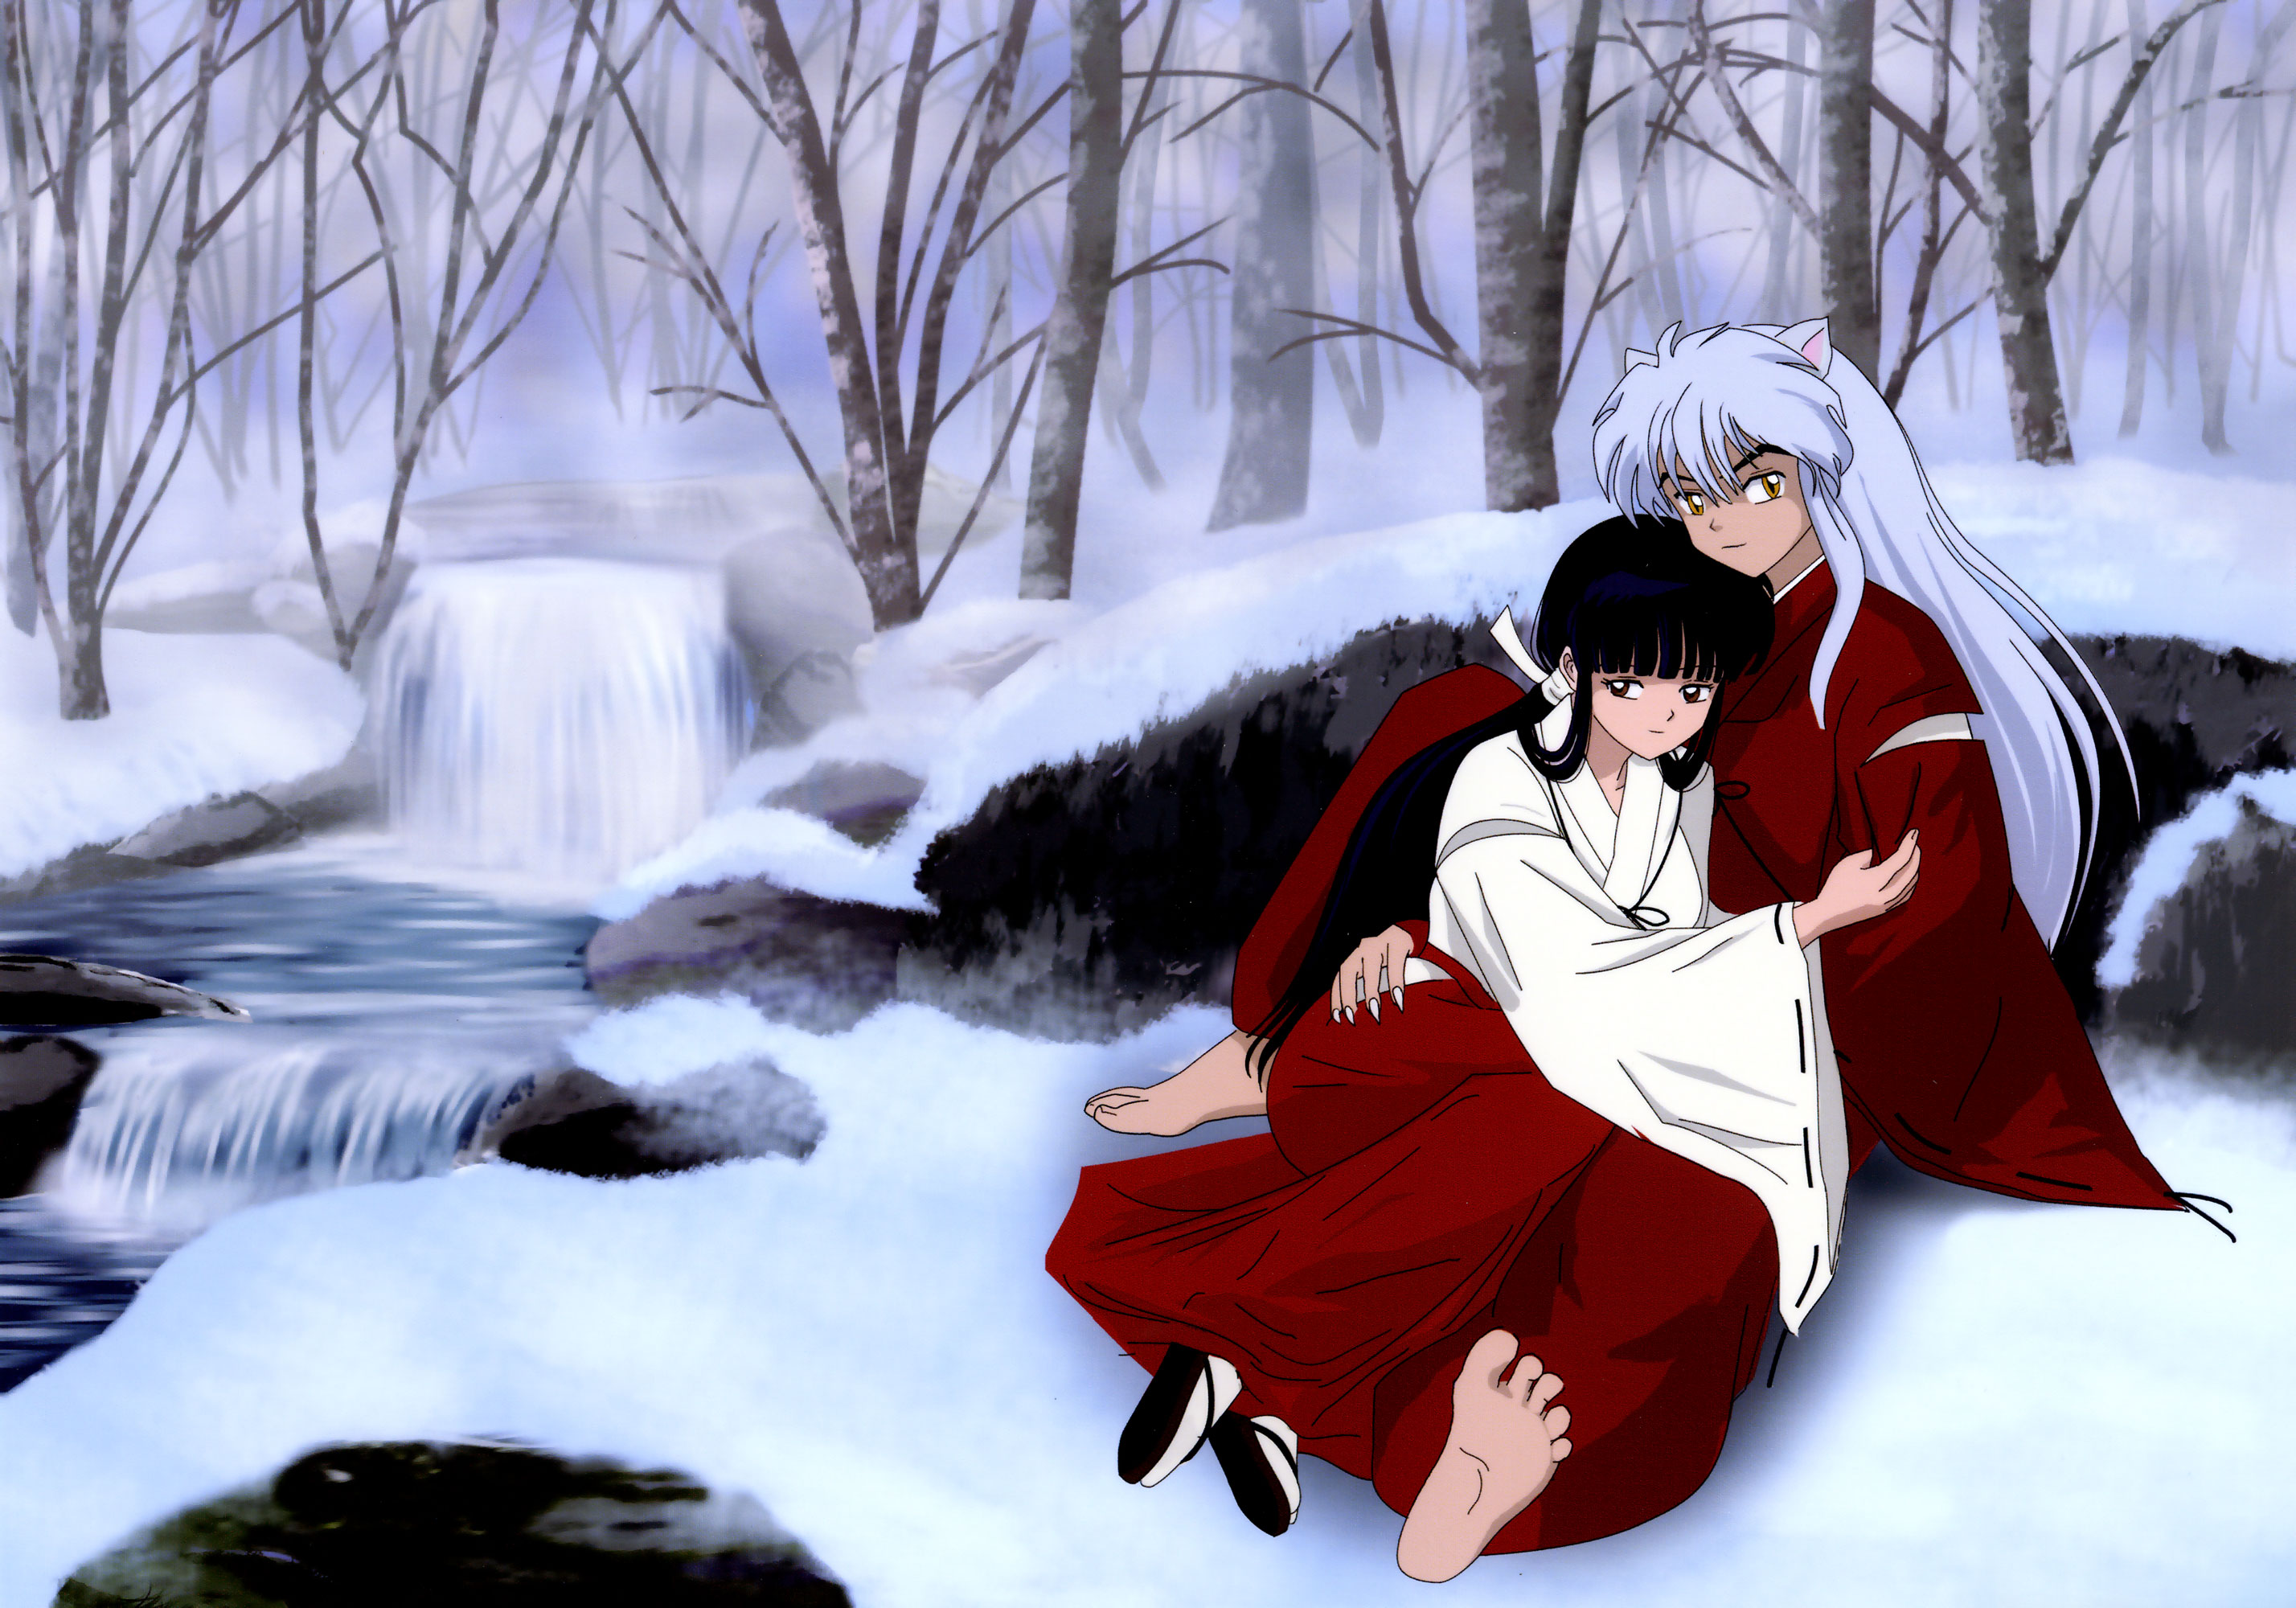 Inuyasha Wallpapers High Quality | Download Free